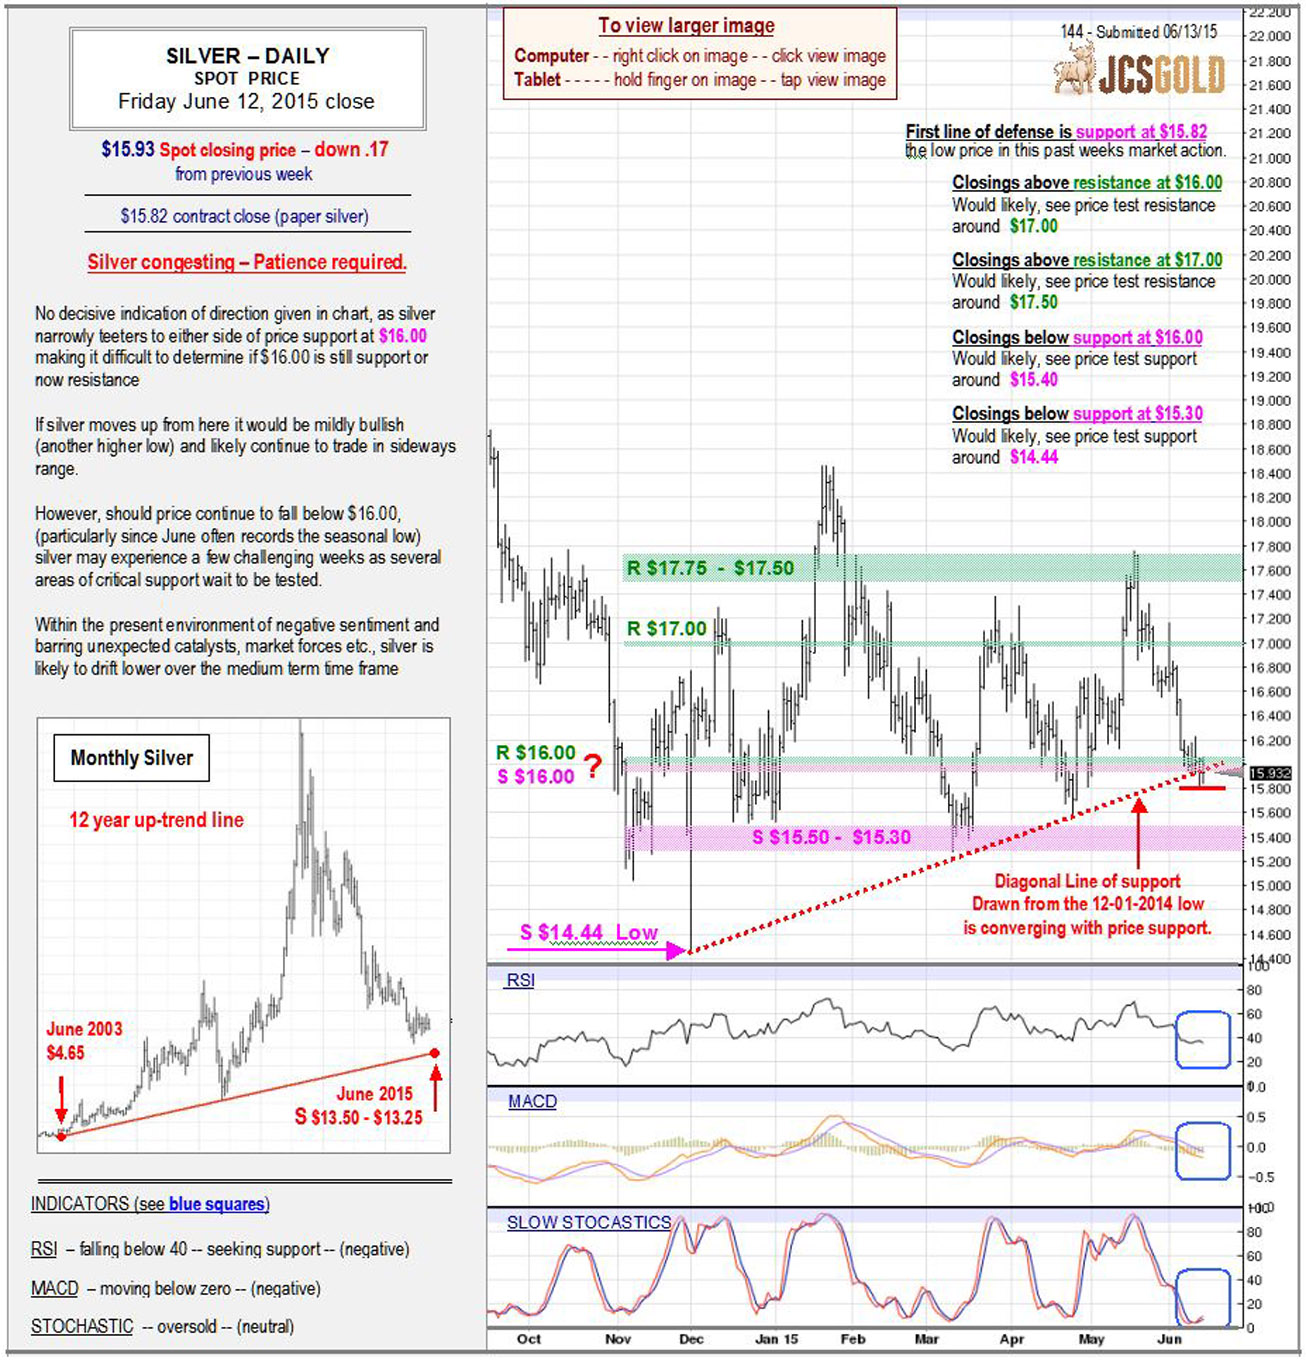 June 12, 2015 chart & commentary